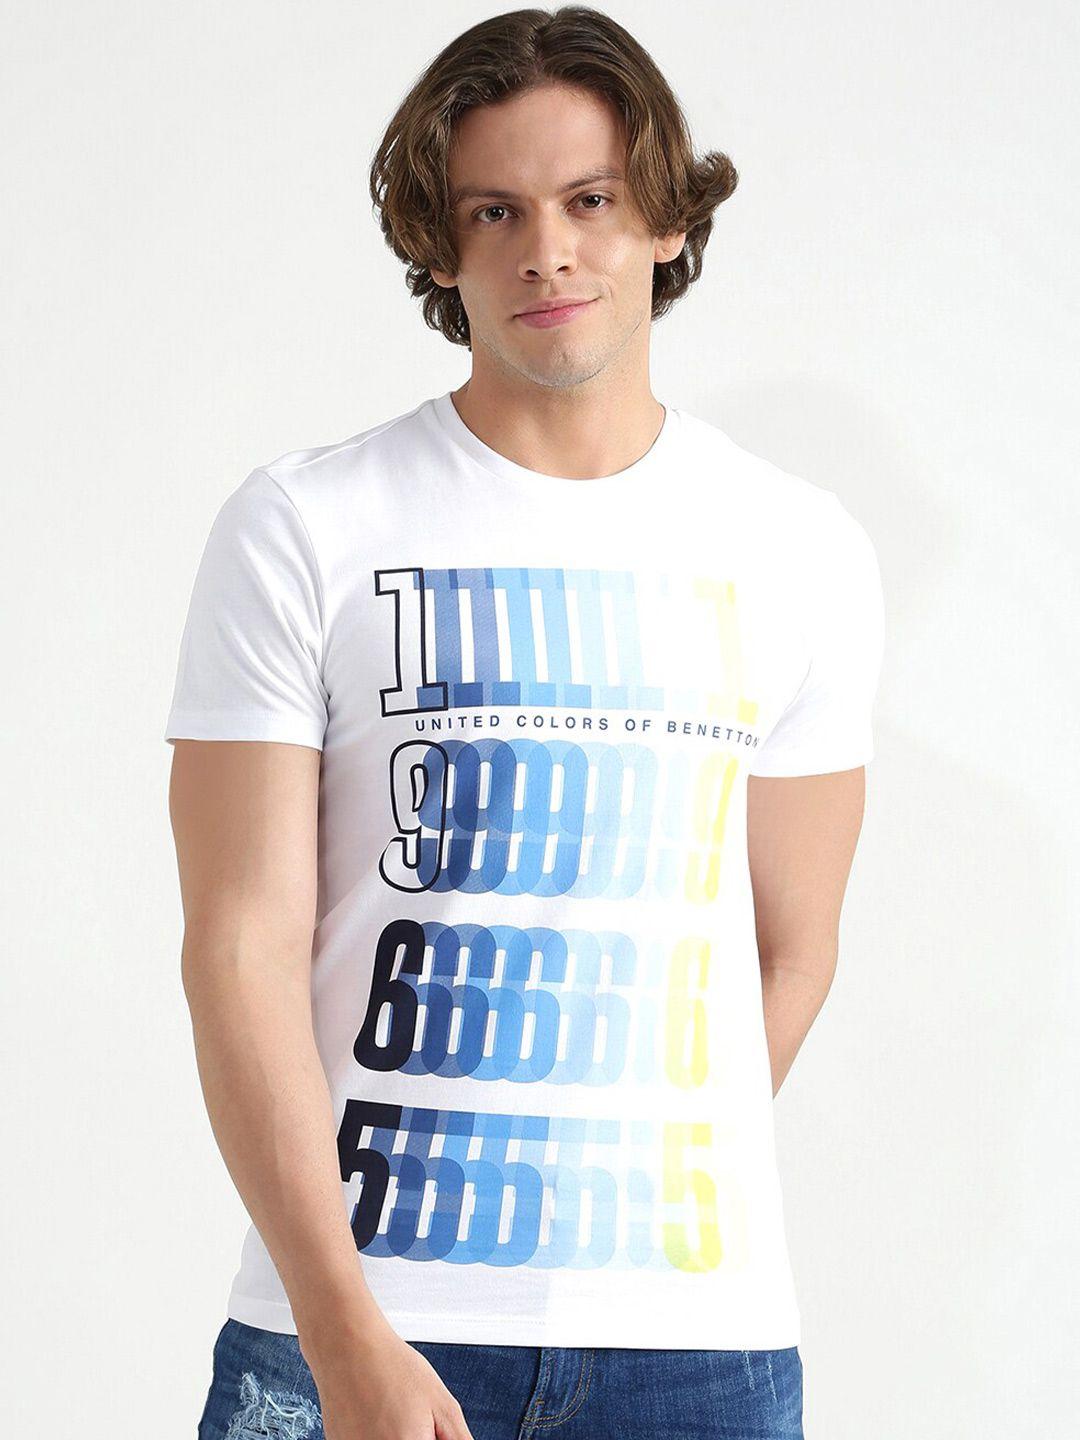 united colors of benetton men white & blue typography printed t-shirt